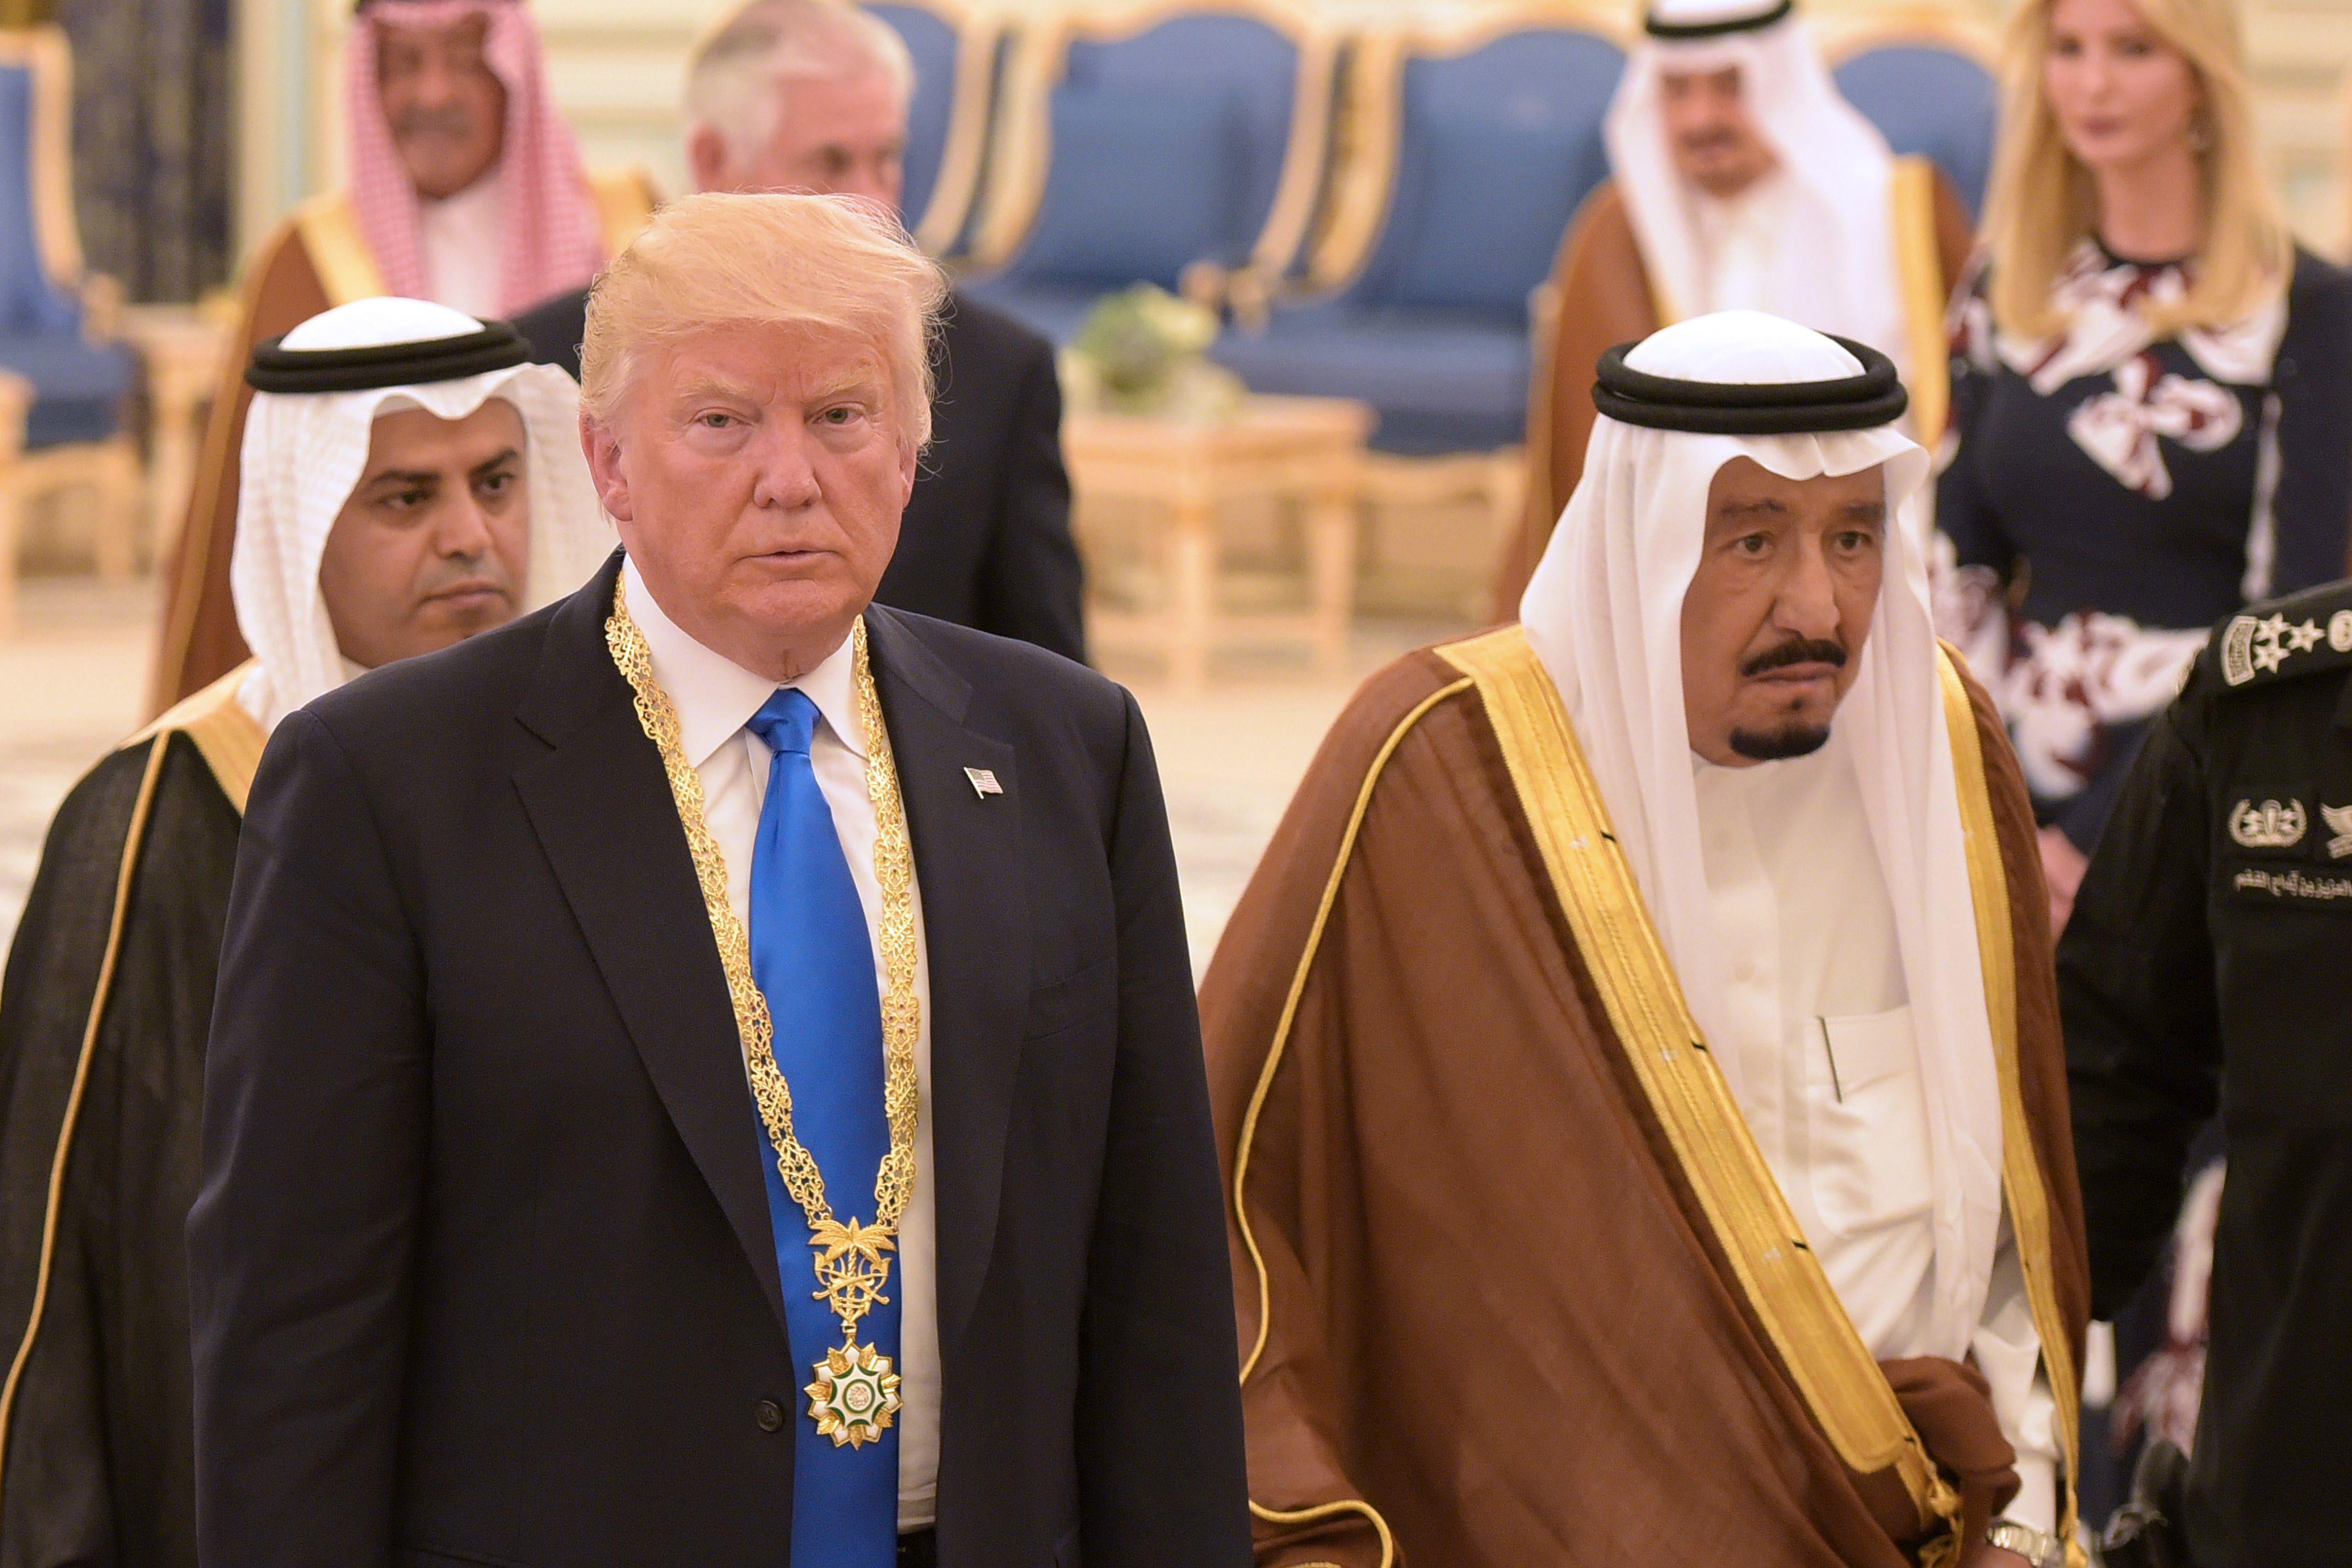 Donald Trump walking with King Salman, with Ivanka Trump and Saudi officials in the background.